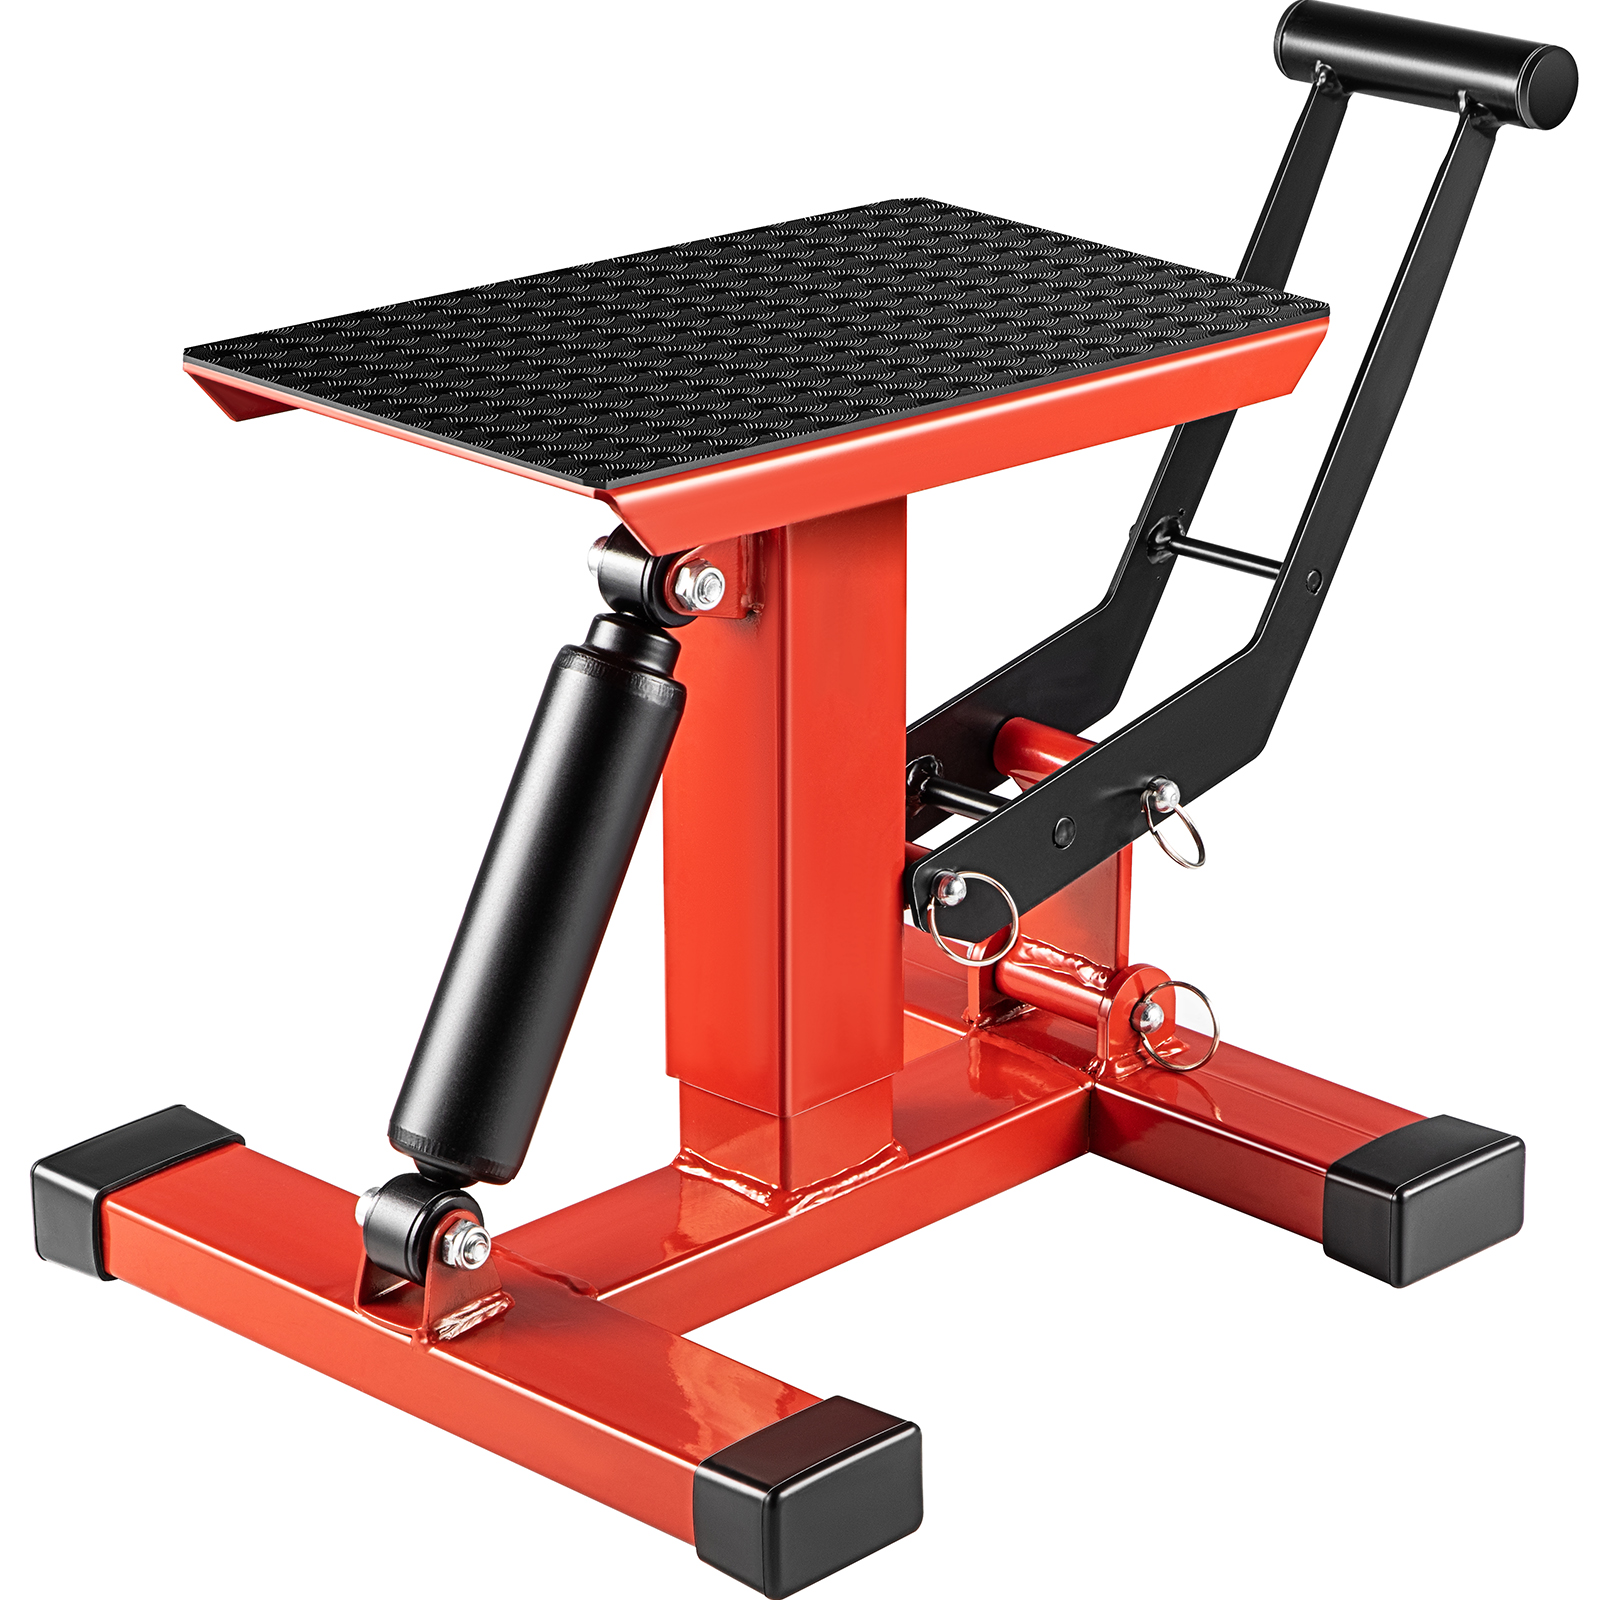 VEVOR Dirt Bike Lift Stand Adjustable Height Easy Lift Table Stand Jack 400 Lbs от Vevor Many GEOs